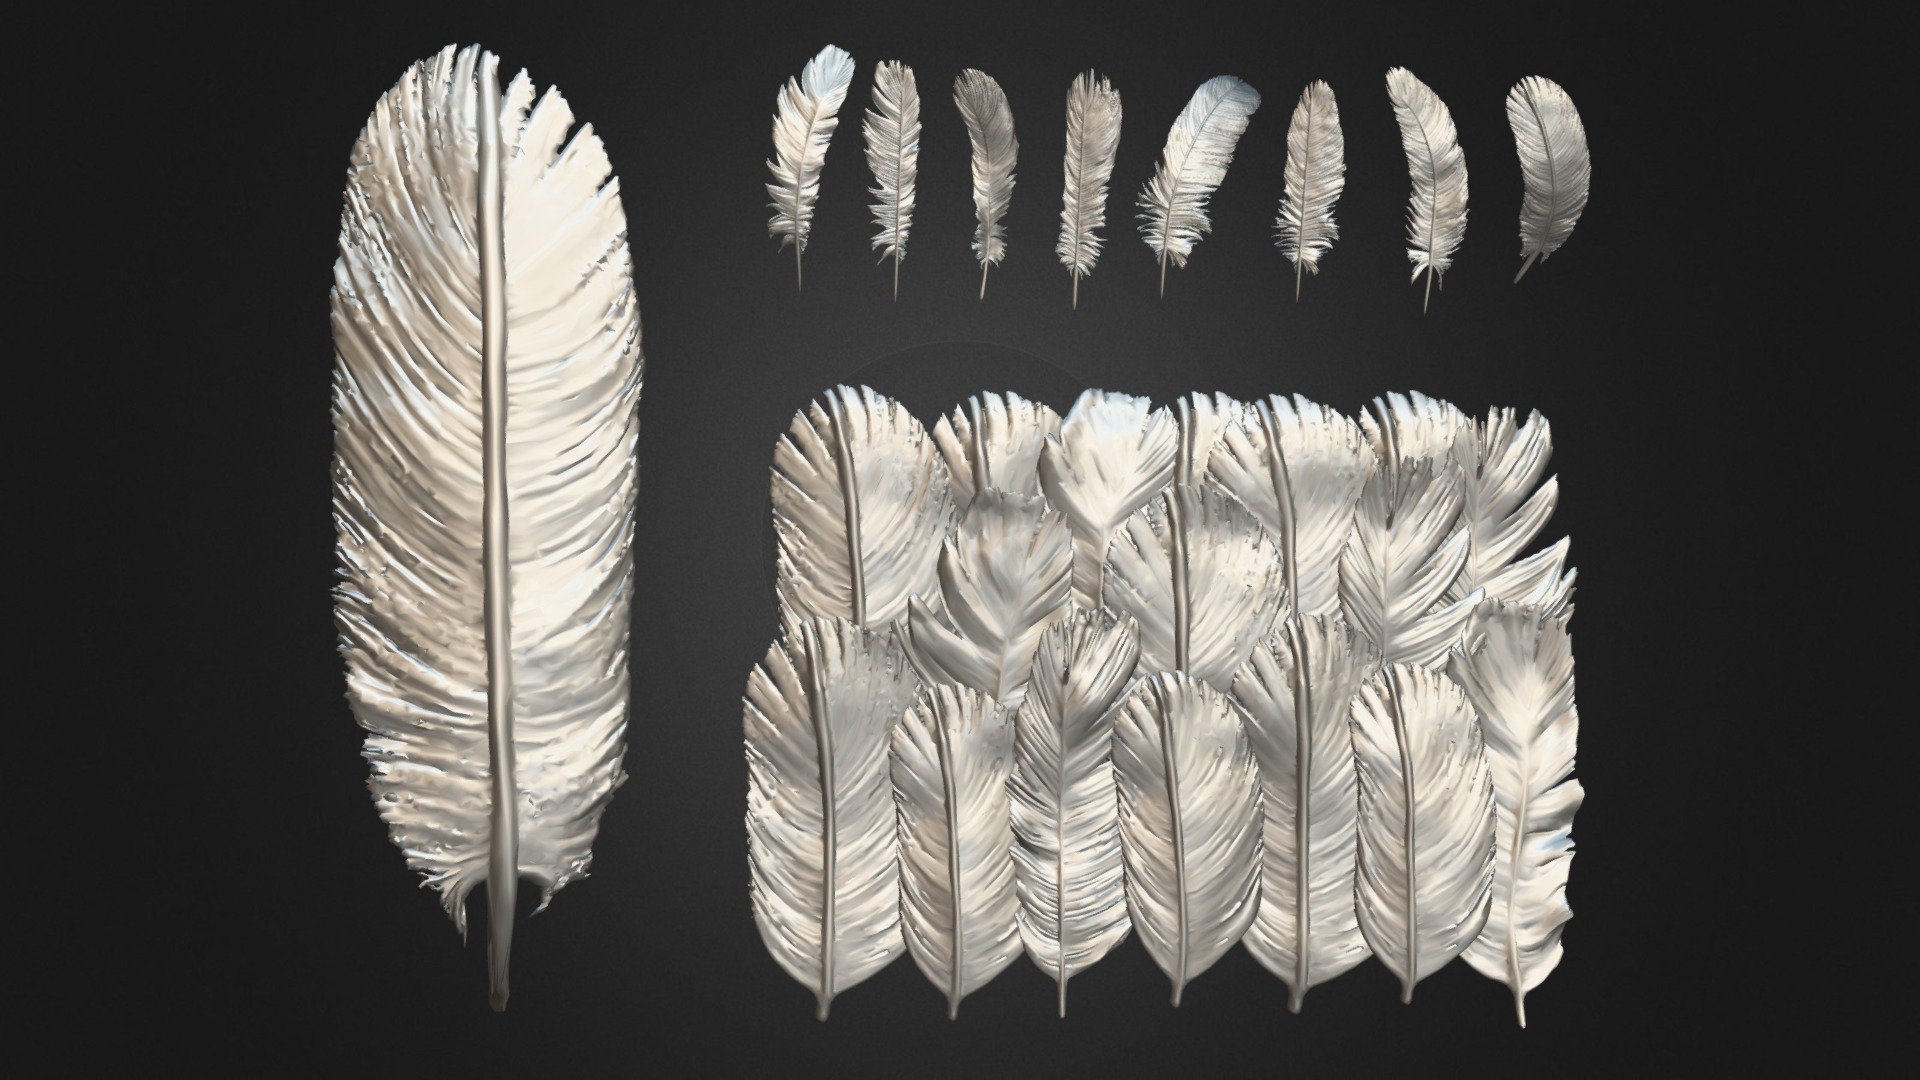 feather brush for zbrush